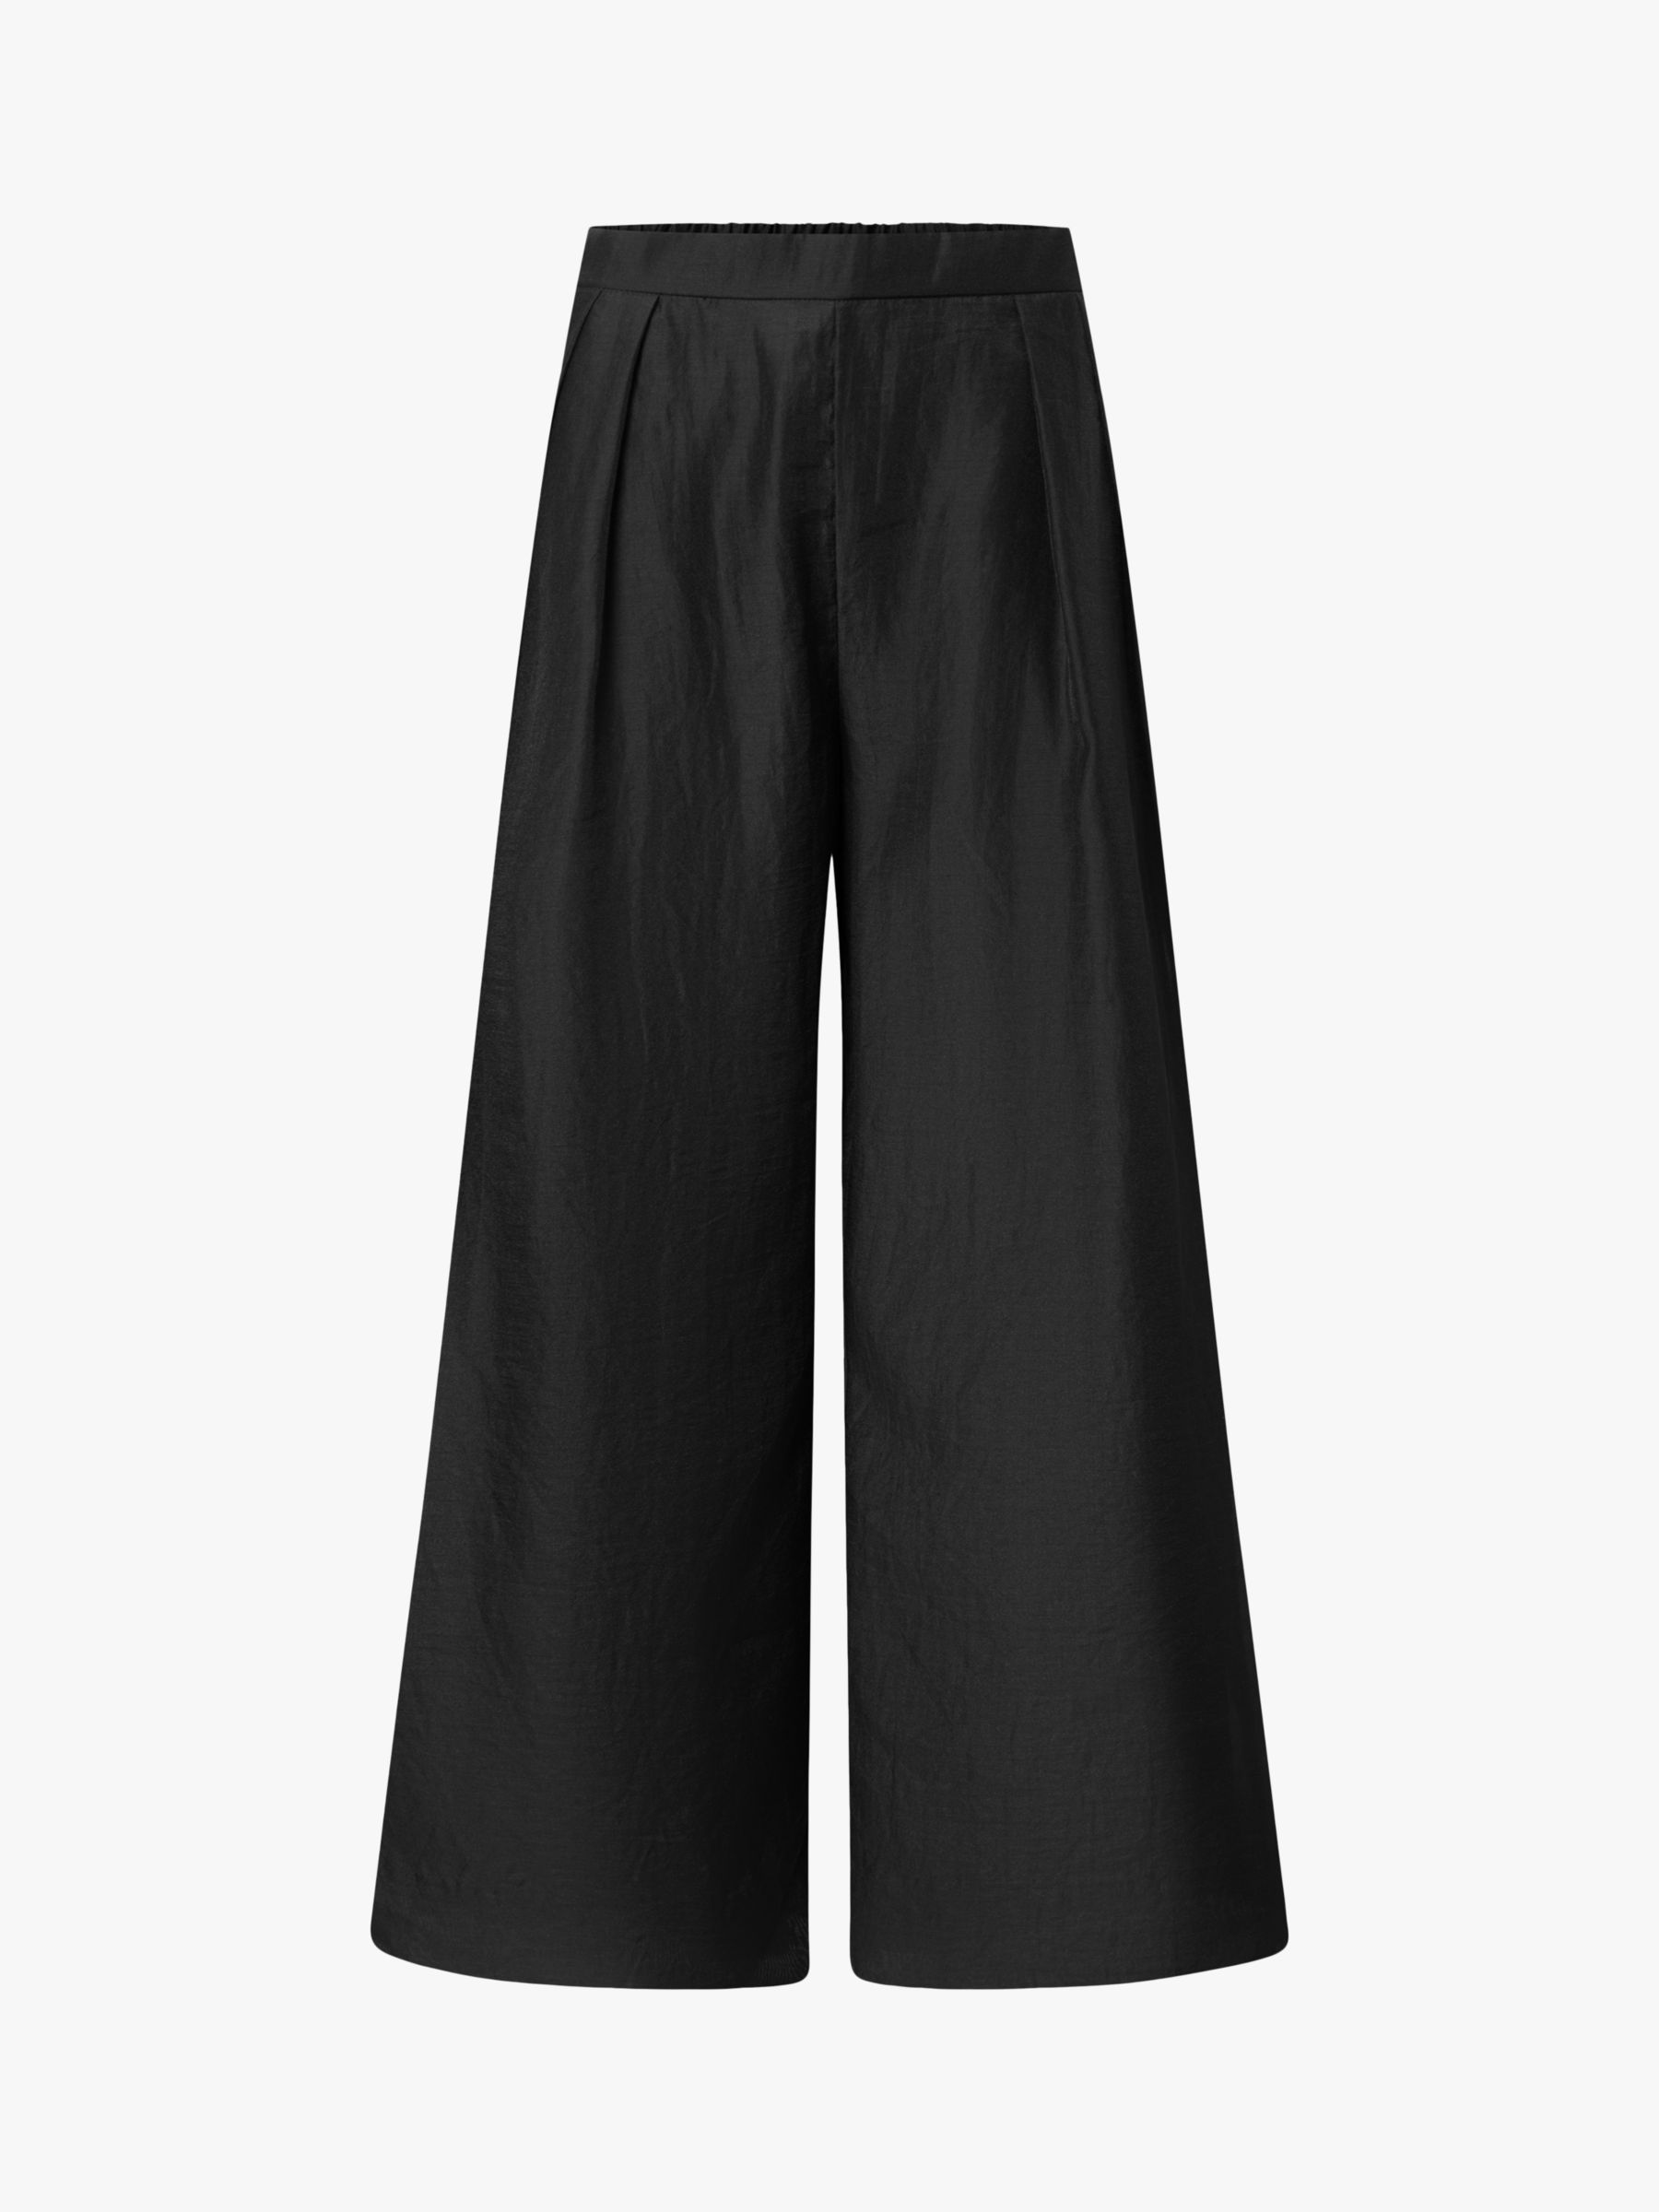 Lovechild 1979 Mary-Anne Wide Leg Trousers, Black, 16